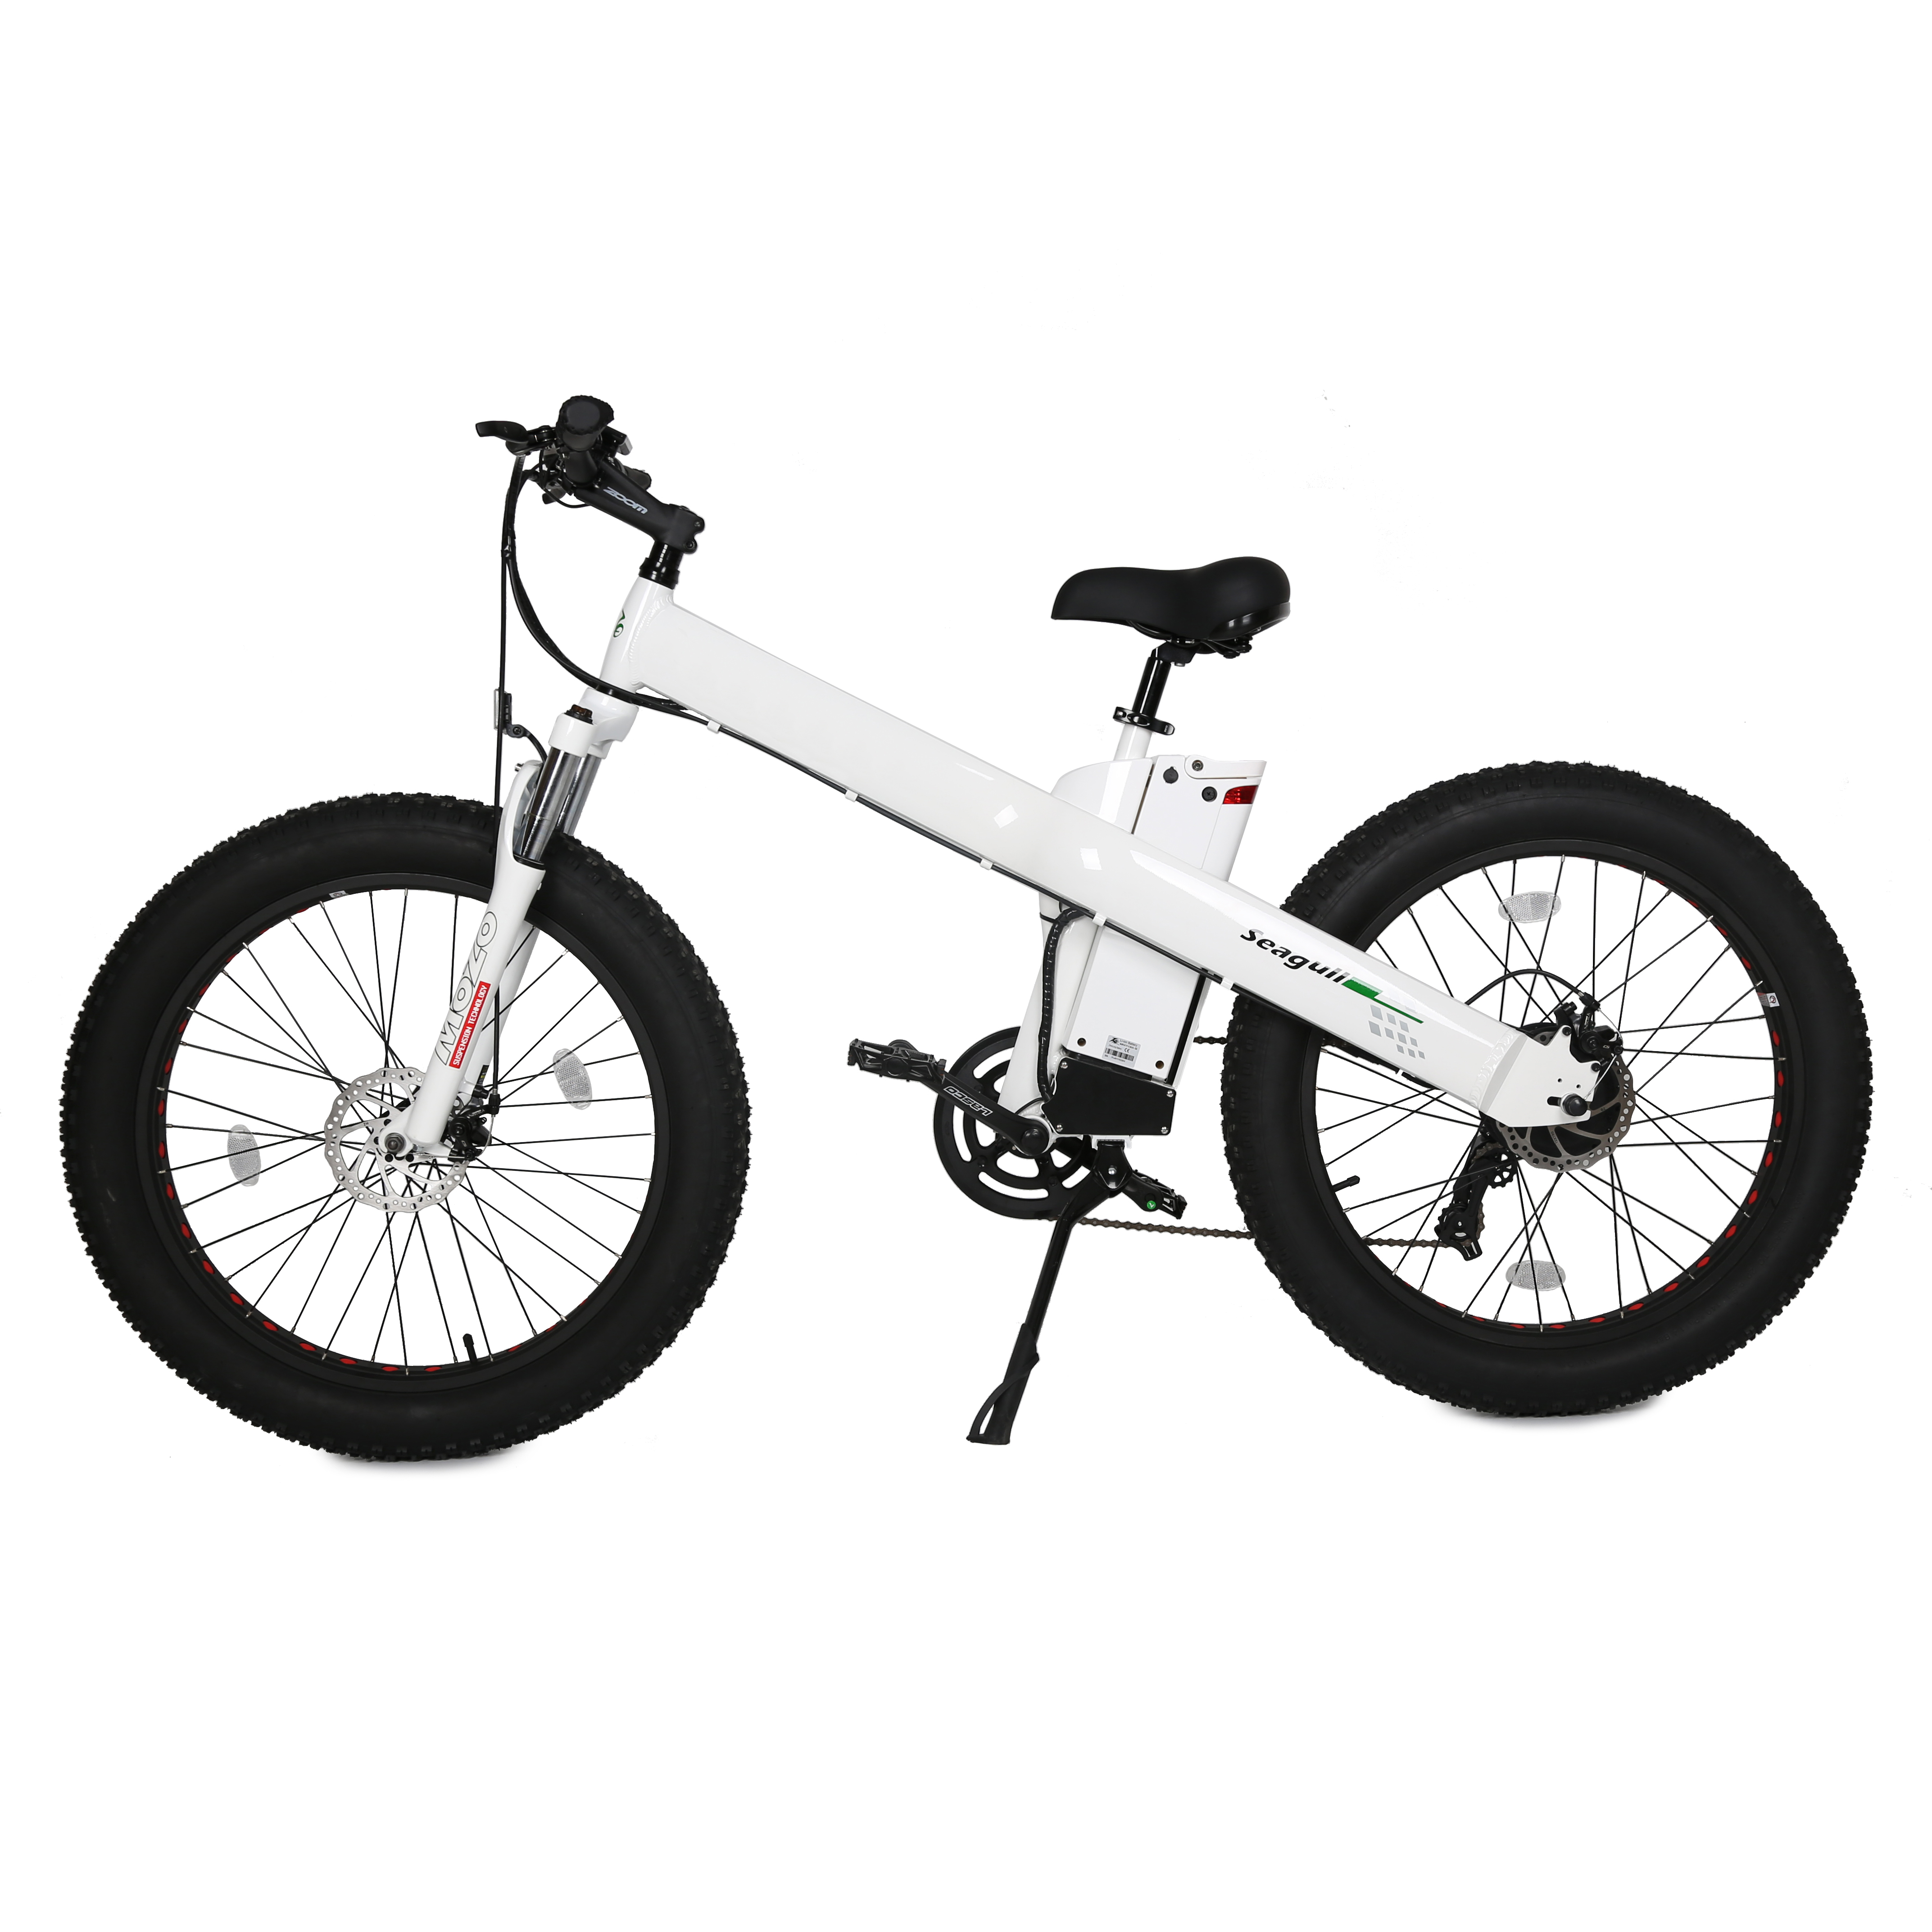 20inch 36V 250W seagull electric bike with fat tire